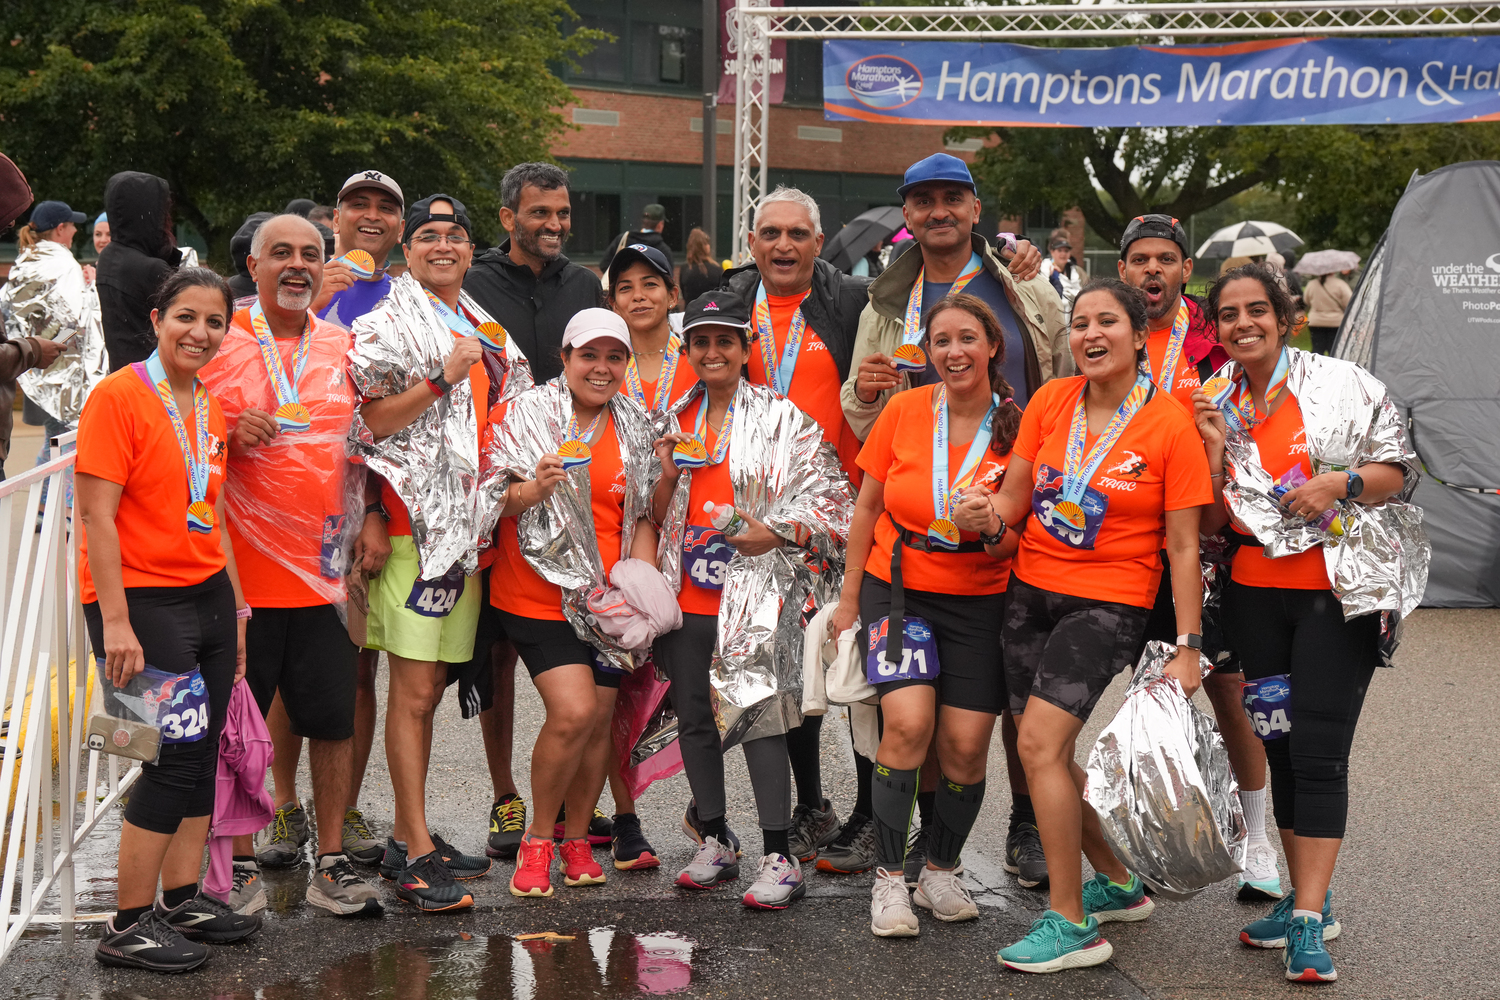 Despite the weather, those who came out for the Hamptons Marathon on Saturday in Southampton had a good time.  RON ESPOSITO